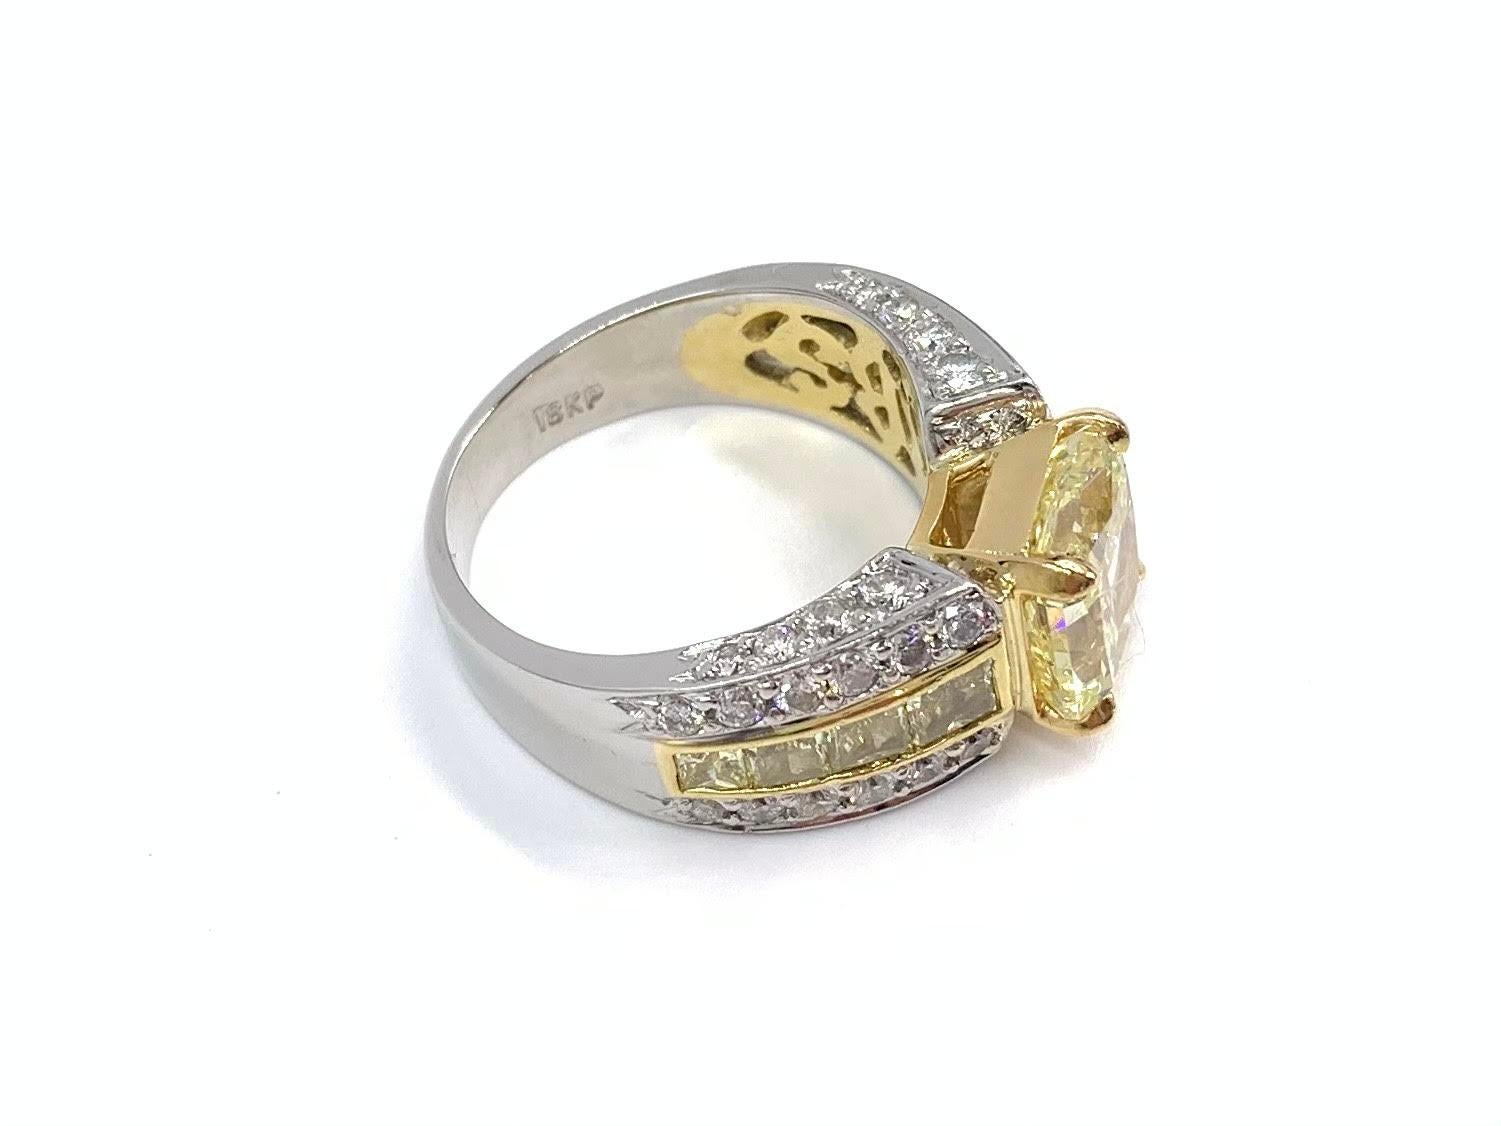 A GIA certified 3.03 carat fancy yellow, SI2 clarity radiant cut diamond is beautifully set in a platinum & 18k yellow JB Star mounting adorned with 8 fancy yellow princess cut channel-set diamonds (approximately VS2 clarity) and 1.10 carats of pavé